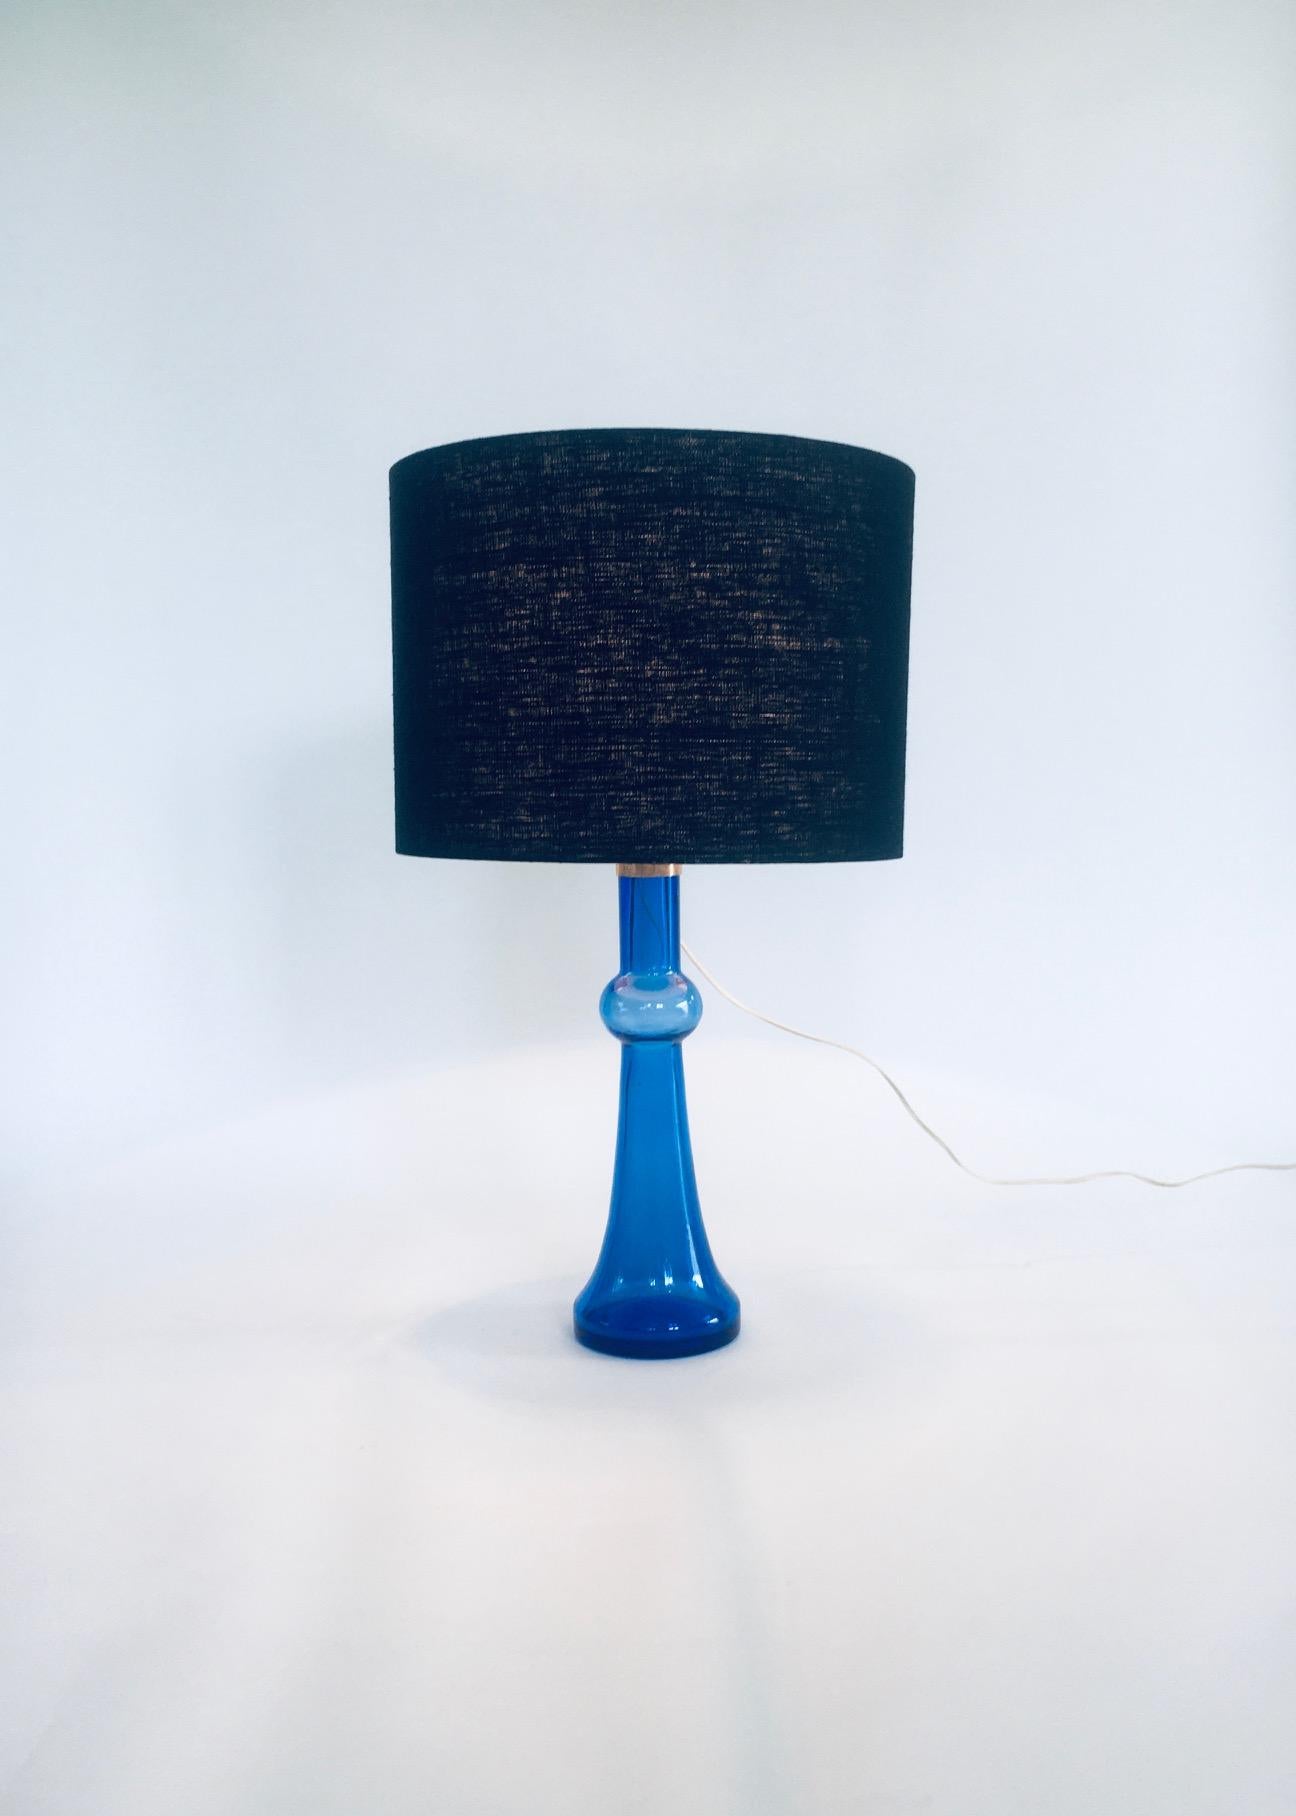 Midcentury Design Blue Glass Table Lamp by Nanny Still for Raak, 1960's For Sale 3